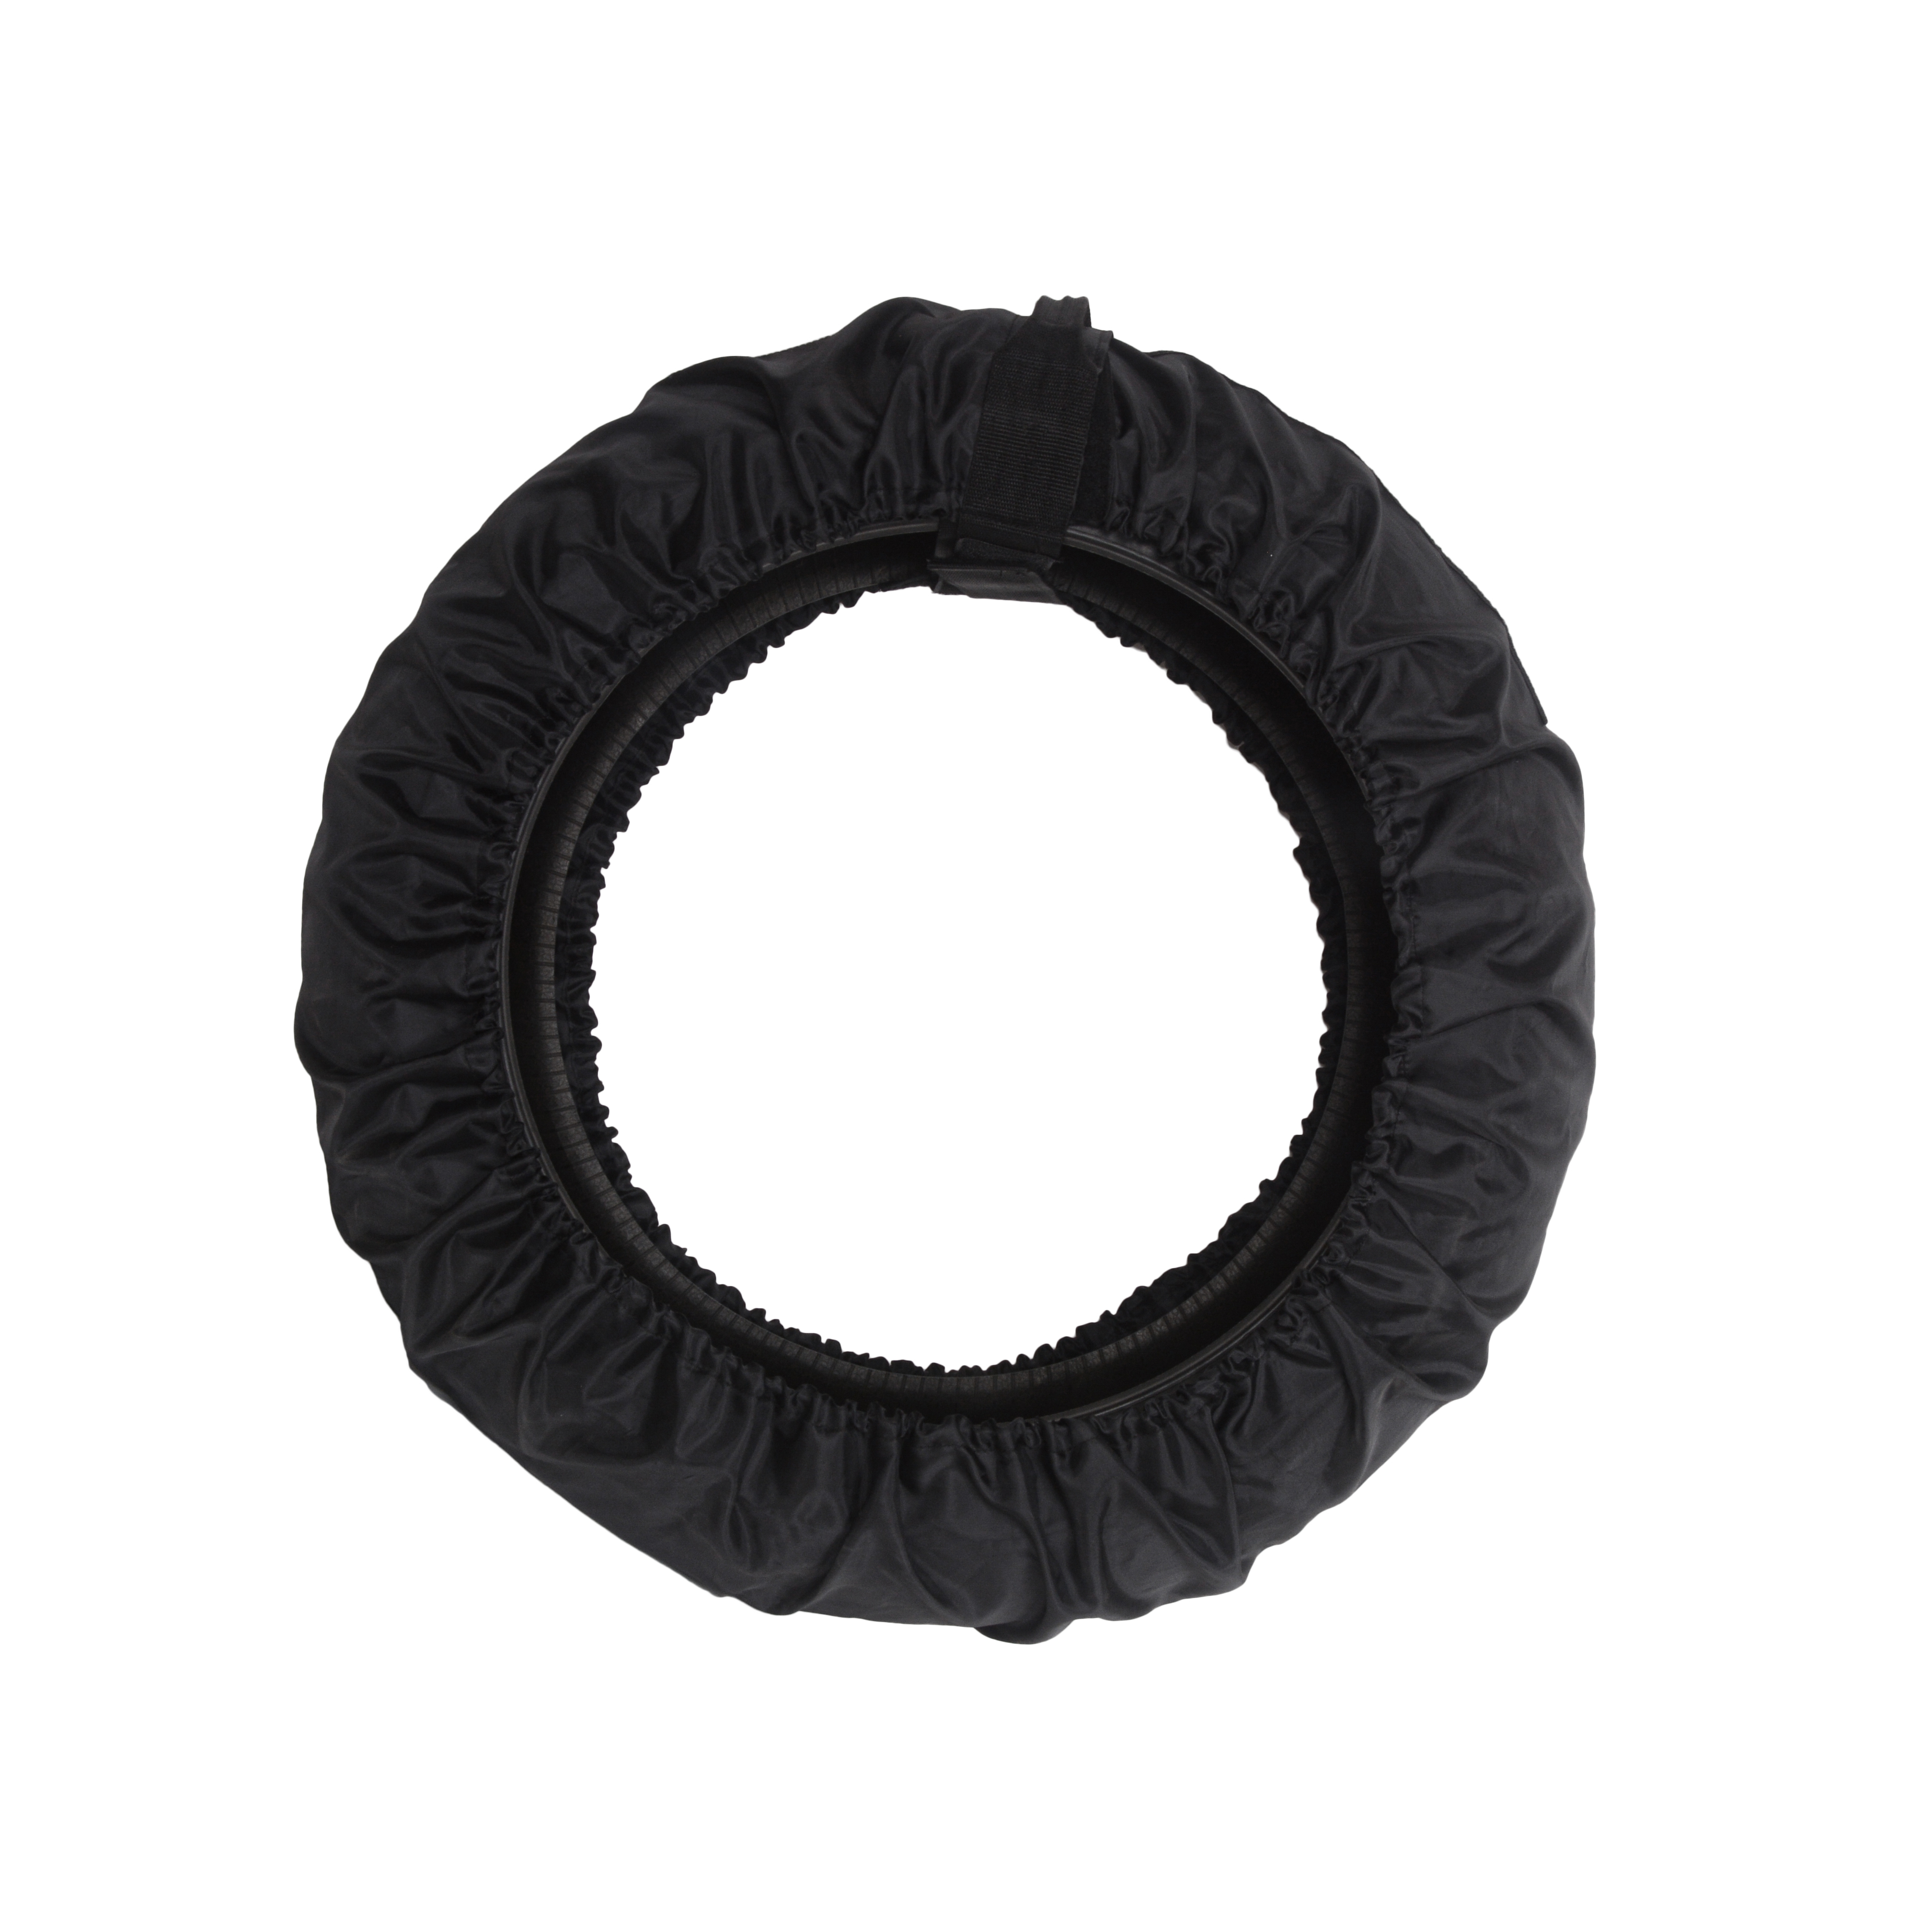 Motorcycle Wheel Dust Cover for 16-21 Inch Tires